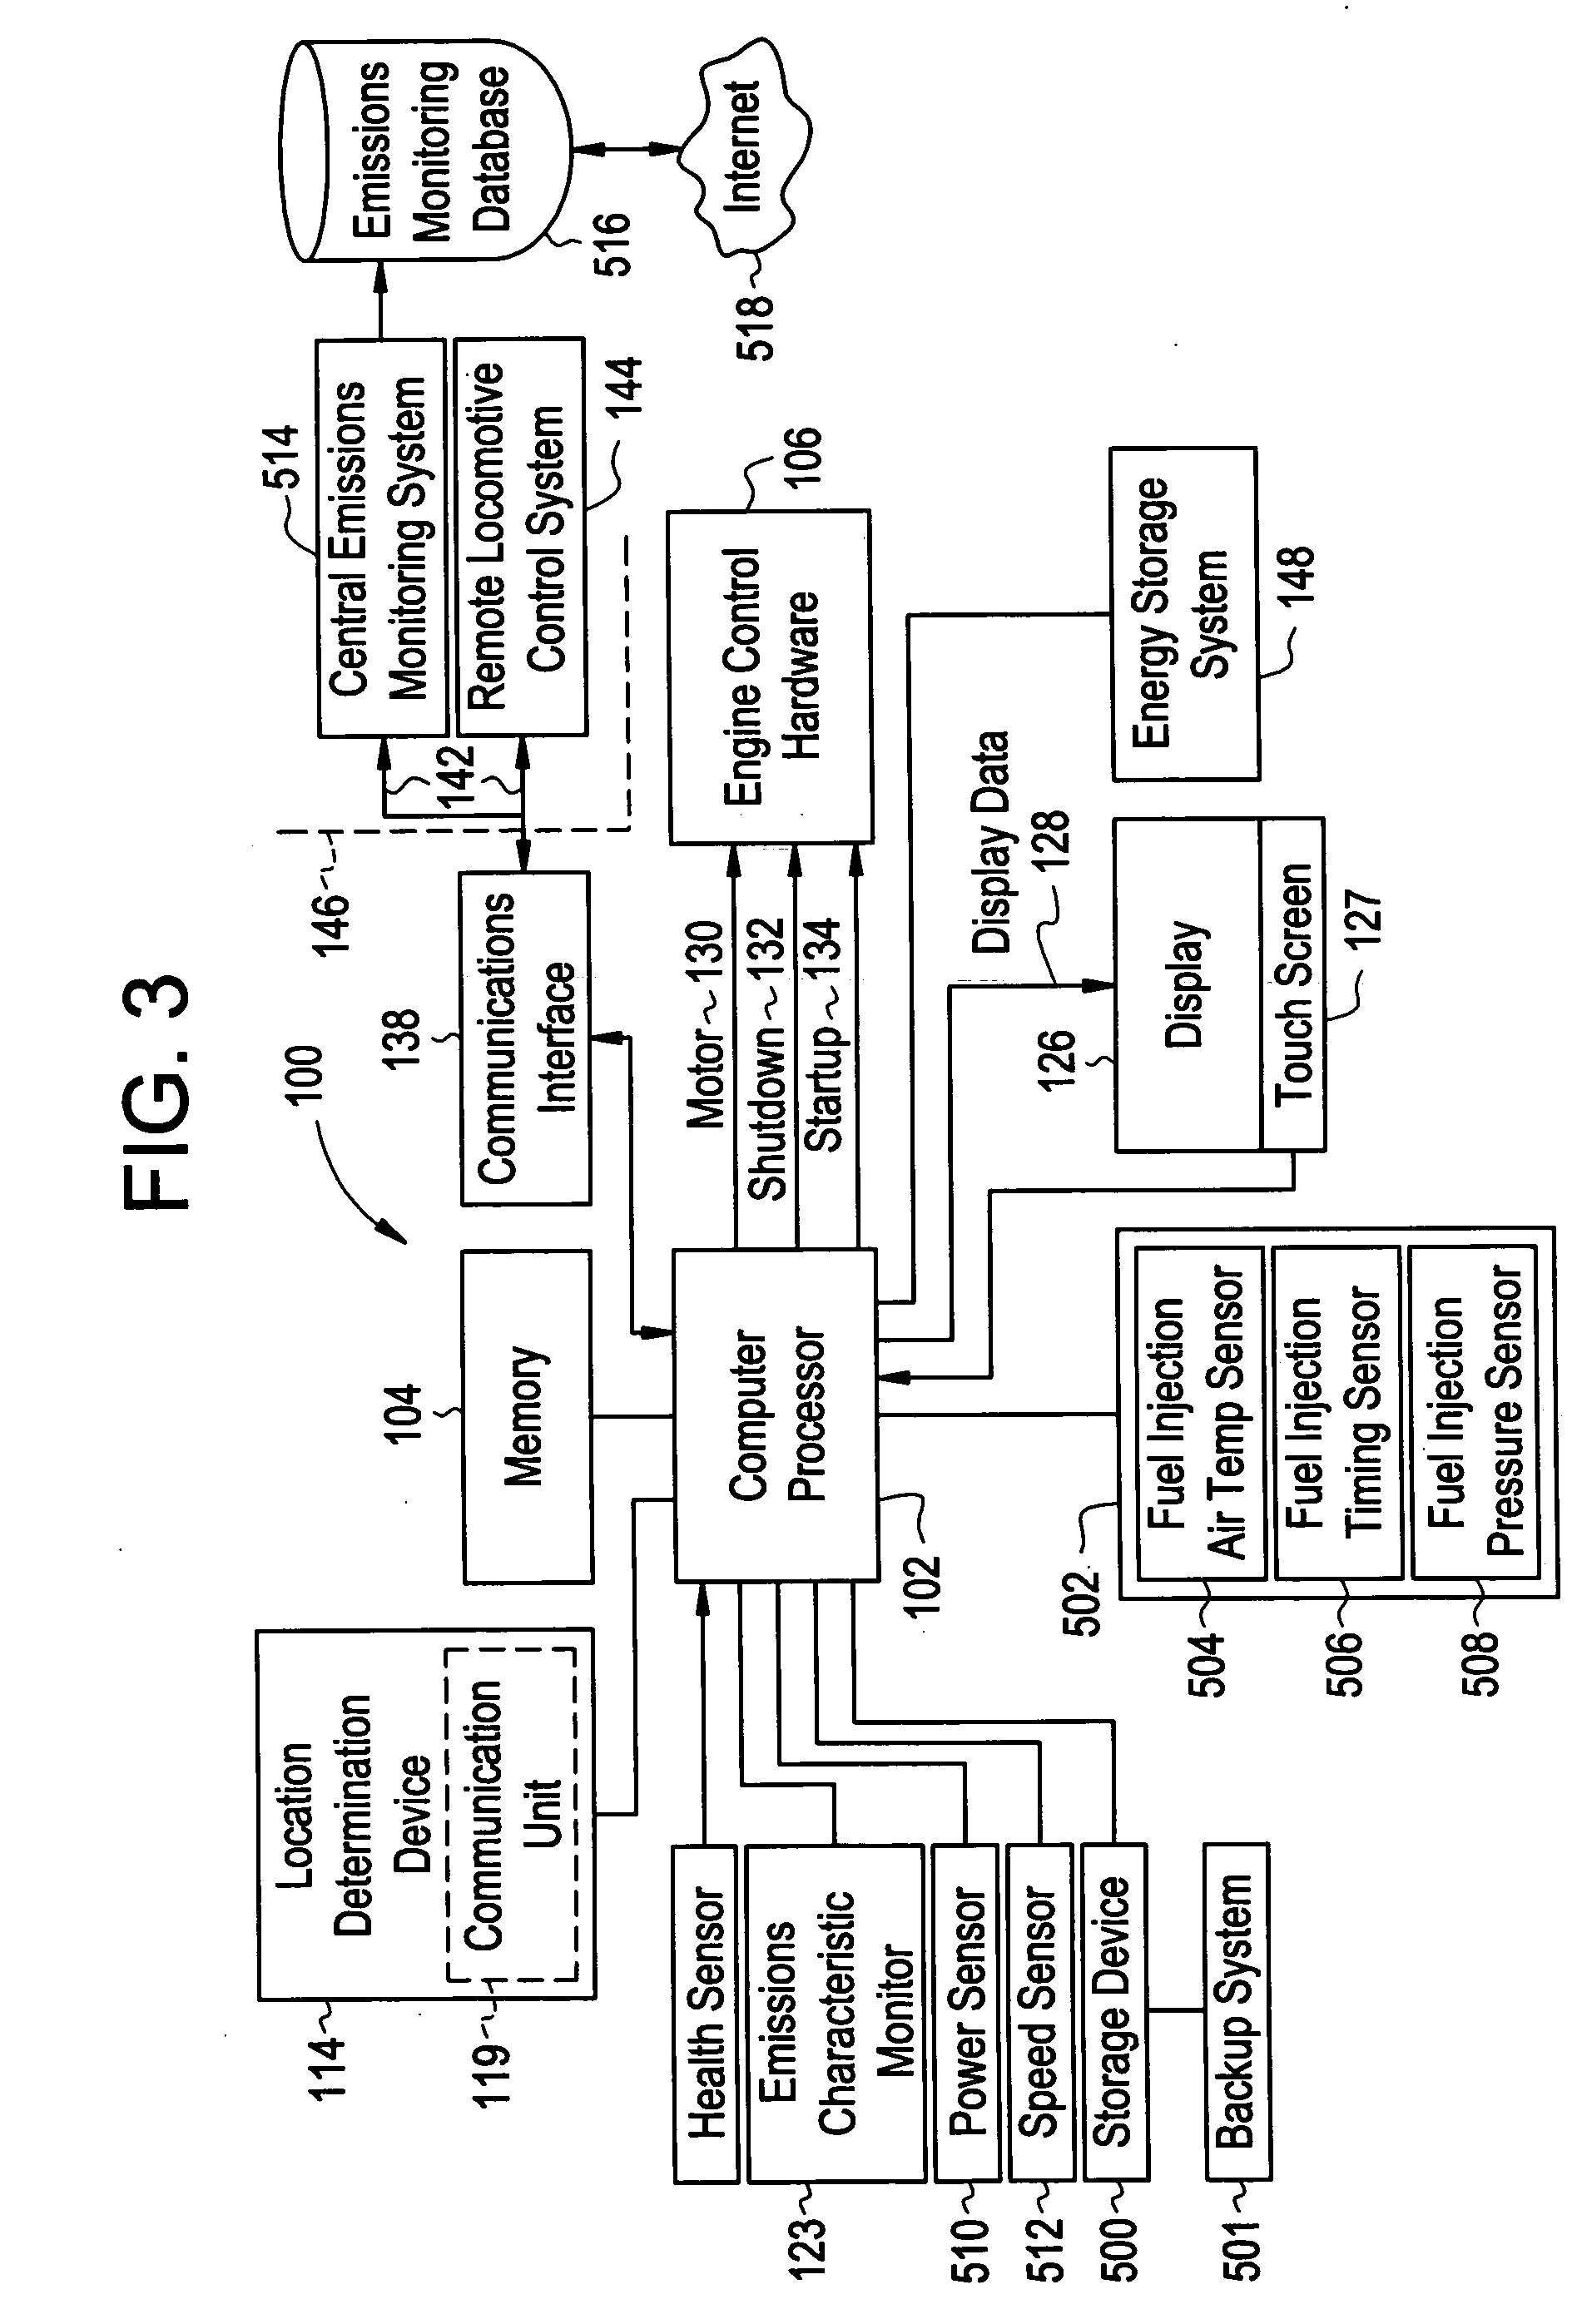 System and method for managing emissions from mobile vehicles